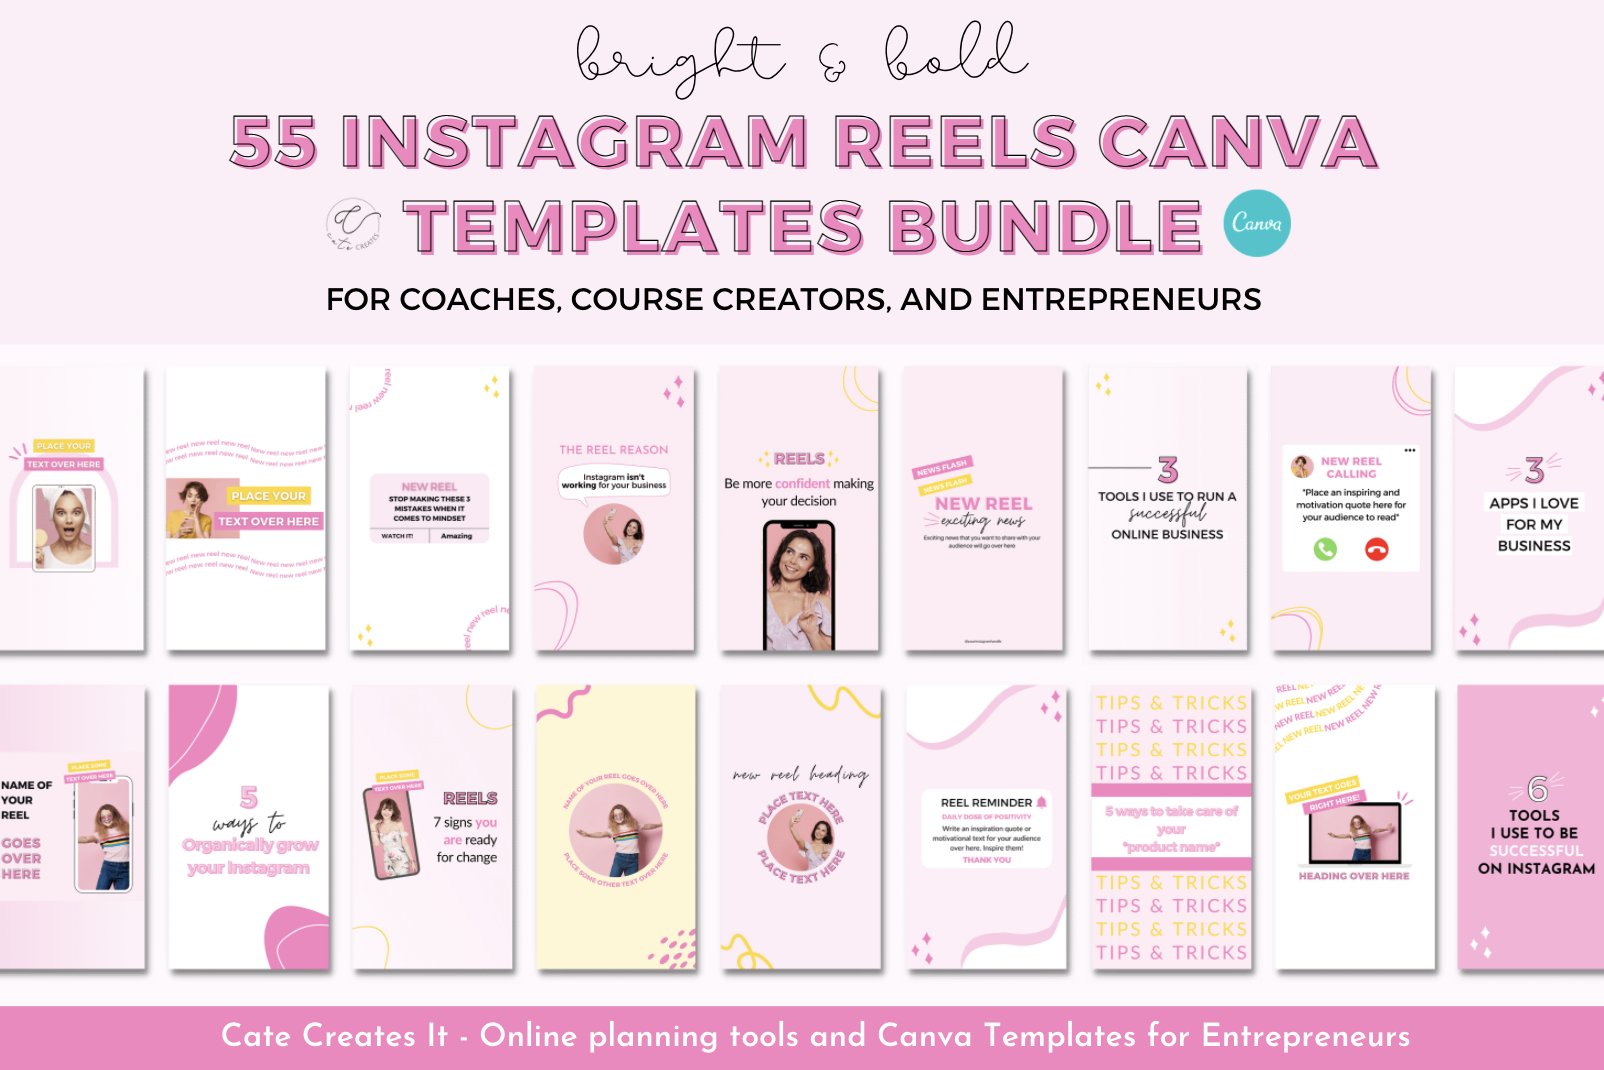 Instagram Reels Canva Template cover image.